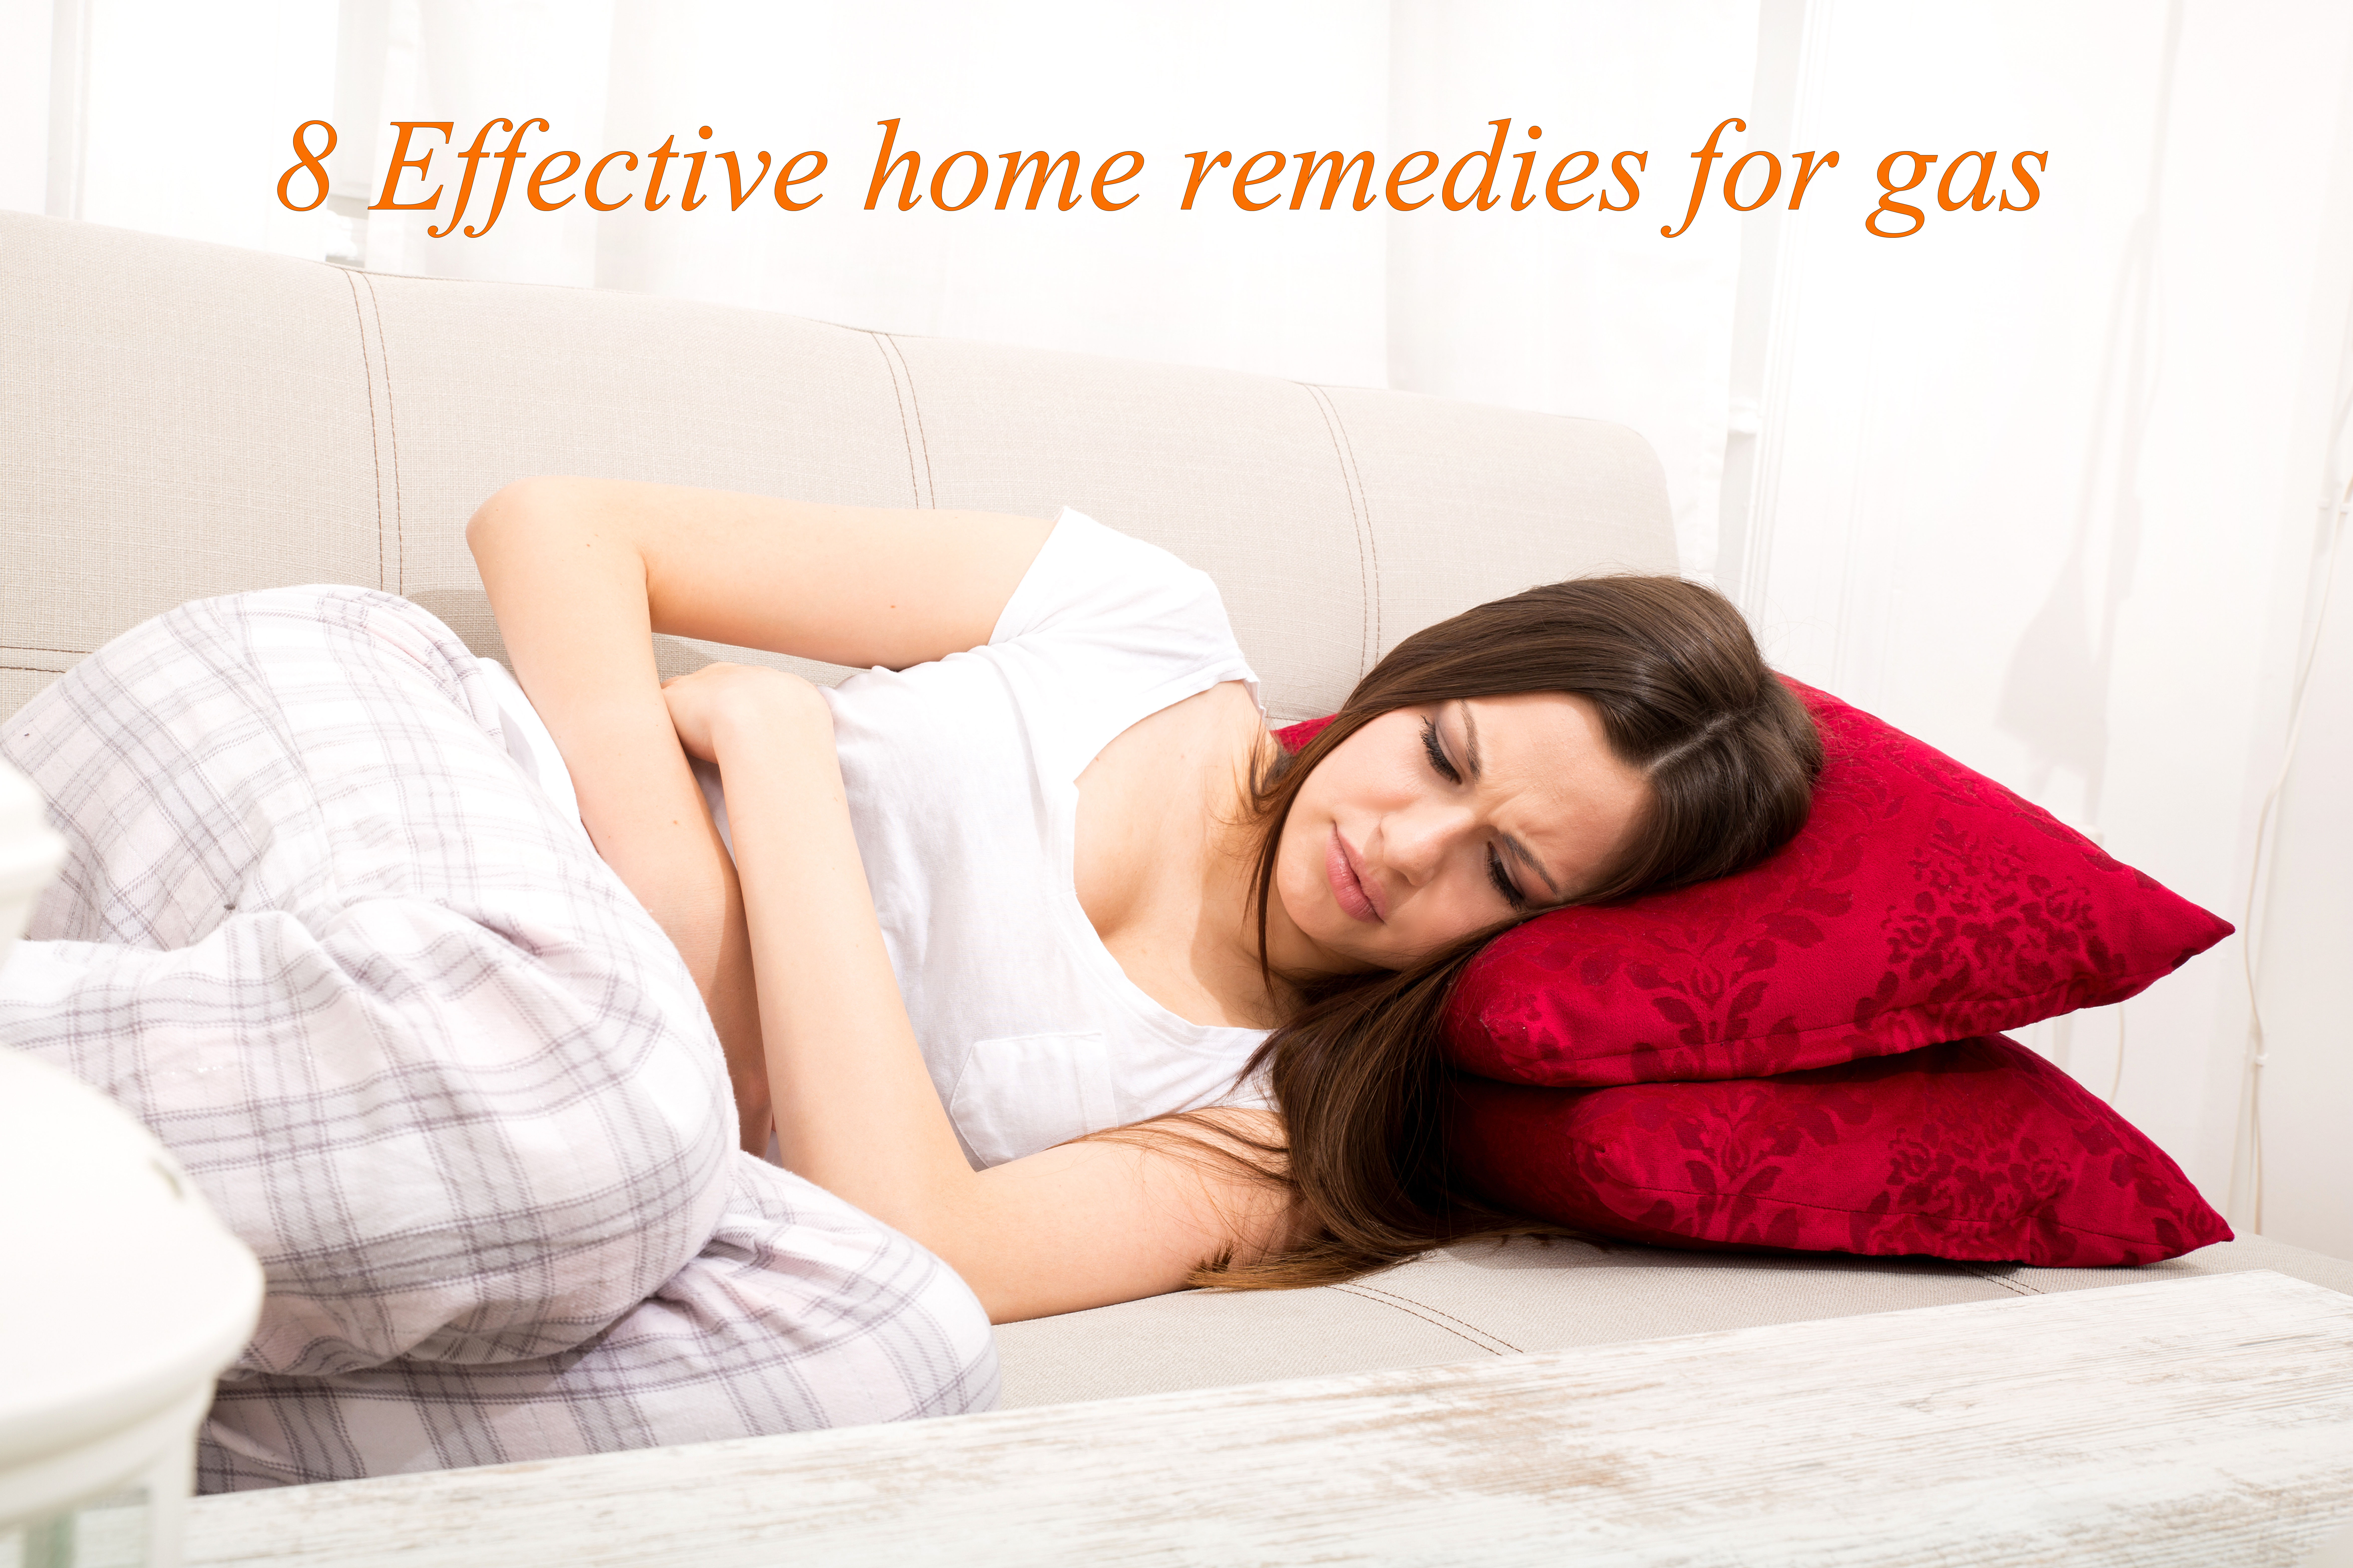 menstrual cramps - 8 Effective Home Remedies for Gas